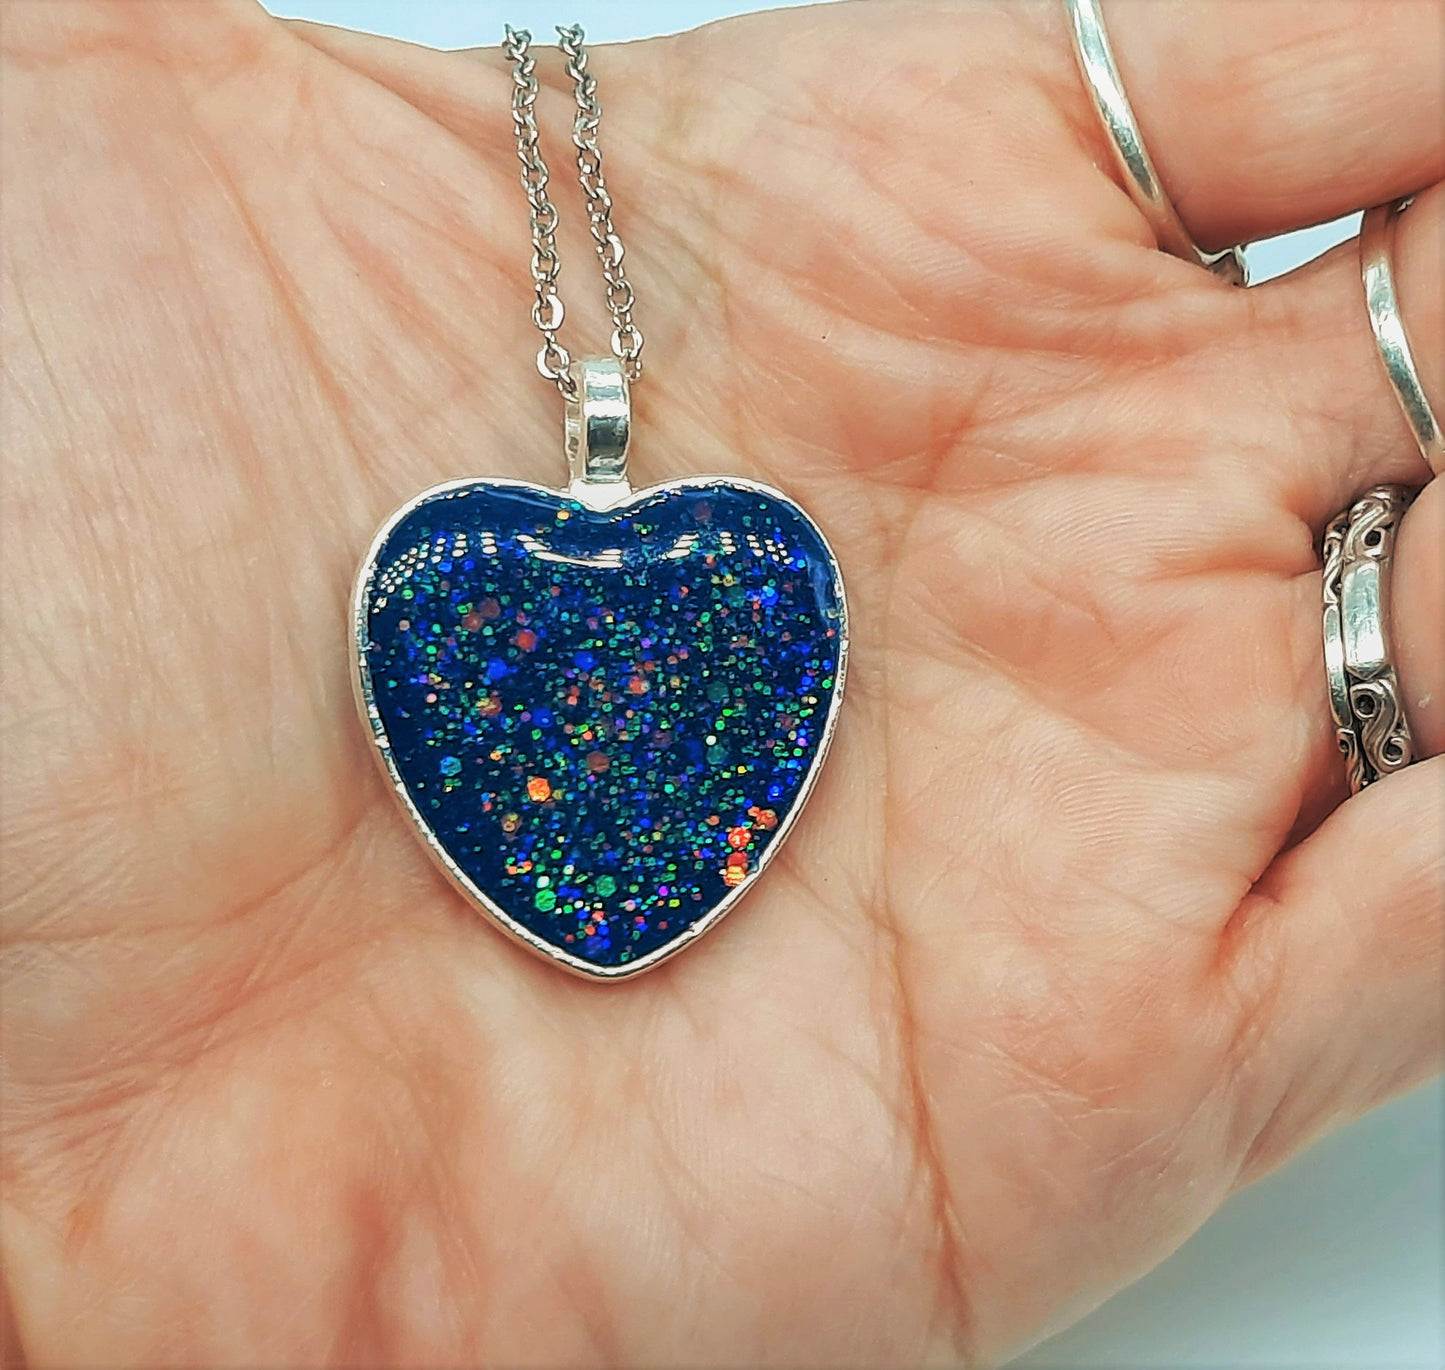 Glitter Sparkle Resin Heart Pendant Necklace / Made with Resin, Mica, Glitter, Glow-in-the-Dark Pigment, Stainless Steel